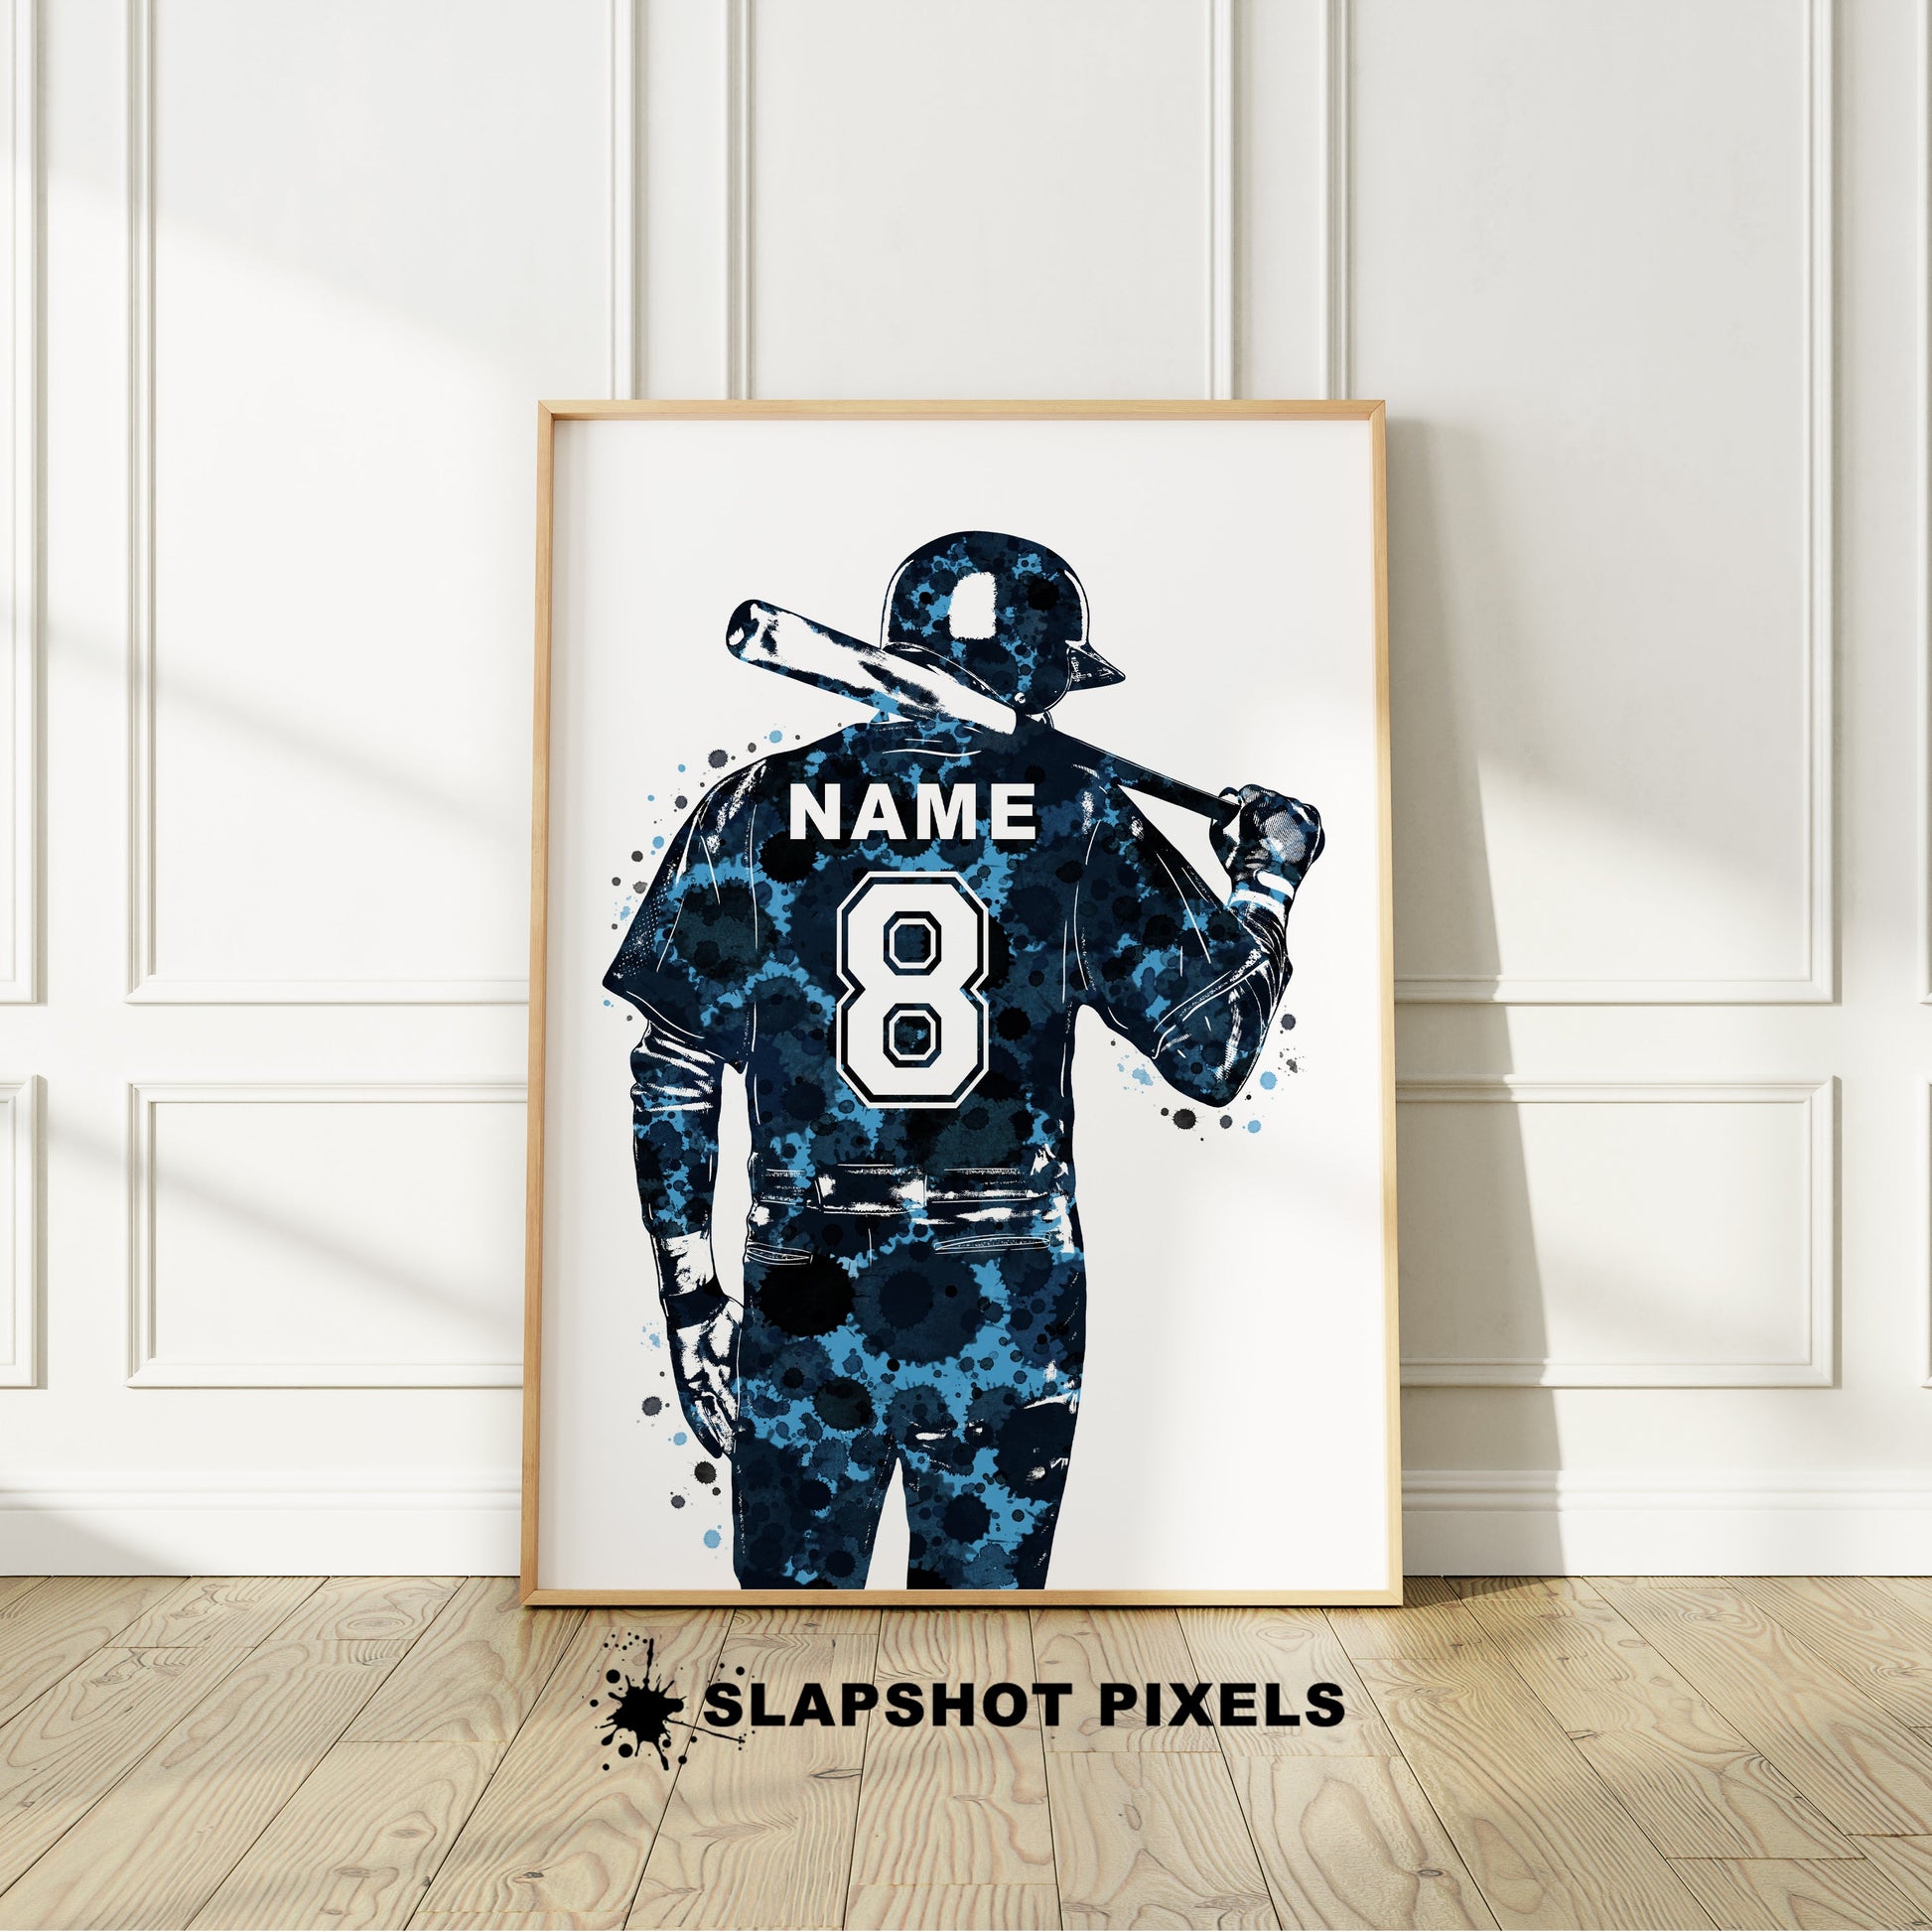 Personalized baseball poster showing back of a boy baseball player with custom name and number on the baseball jersey. Designed in watercolor splatters. Perfect baseball gifts for boys, baseball prints, baseball team gifts, baseball coach gift, baseball wall art décor in a baseball bedroom and birthday gifts for baseball players.